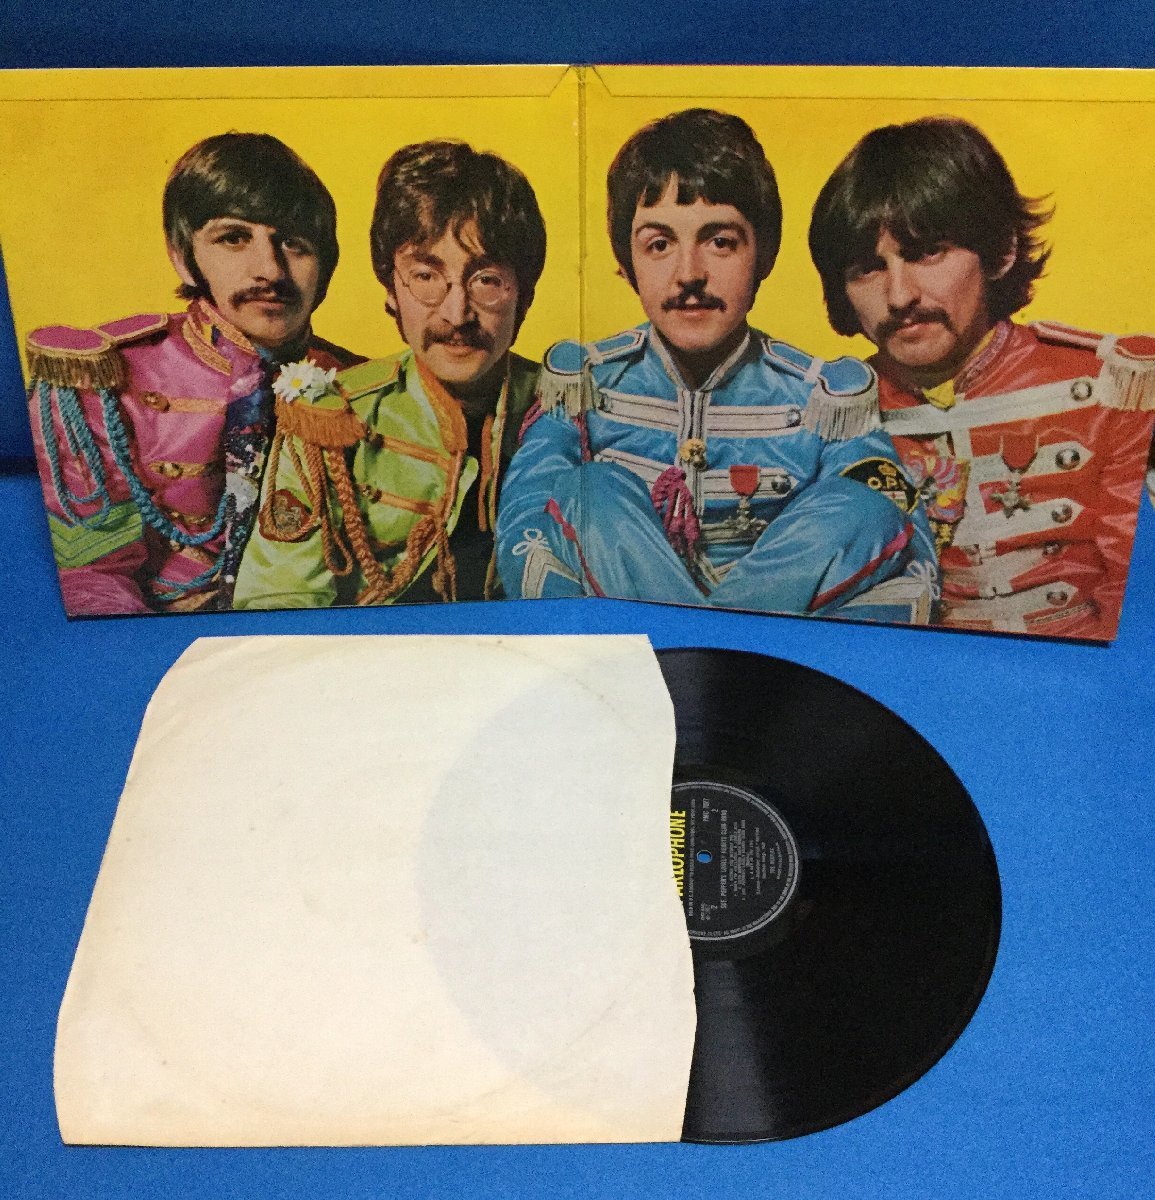 LP 洋楽 The Beatles / Sgt. Pepper's Lonely Hearts Club Band 英盤 mono 1/1 オリジナル_画像2